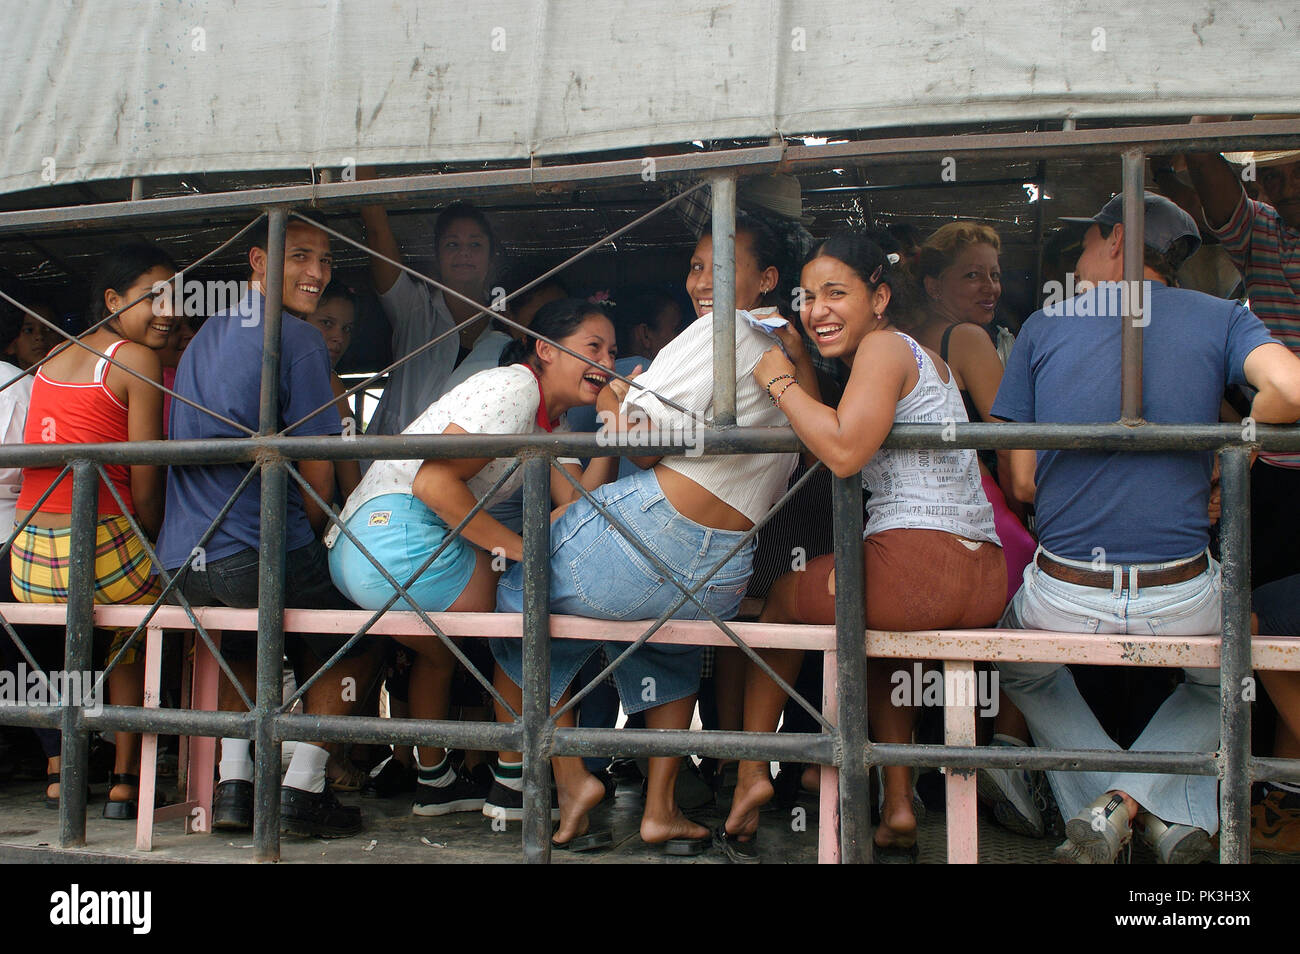 HAVANA, CUBA-MAY 05, 2016: Group of unidentified people in a open truck. In 2004, the public transportation system is non existing in Cuba, only a few Stock Photo